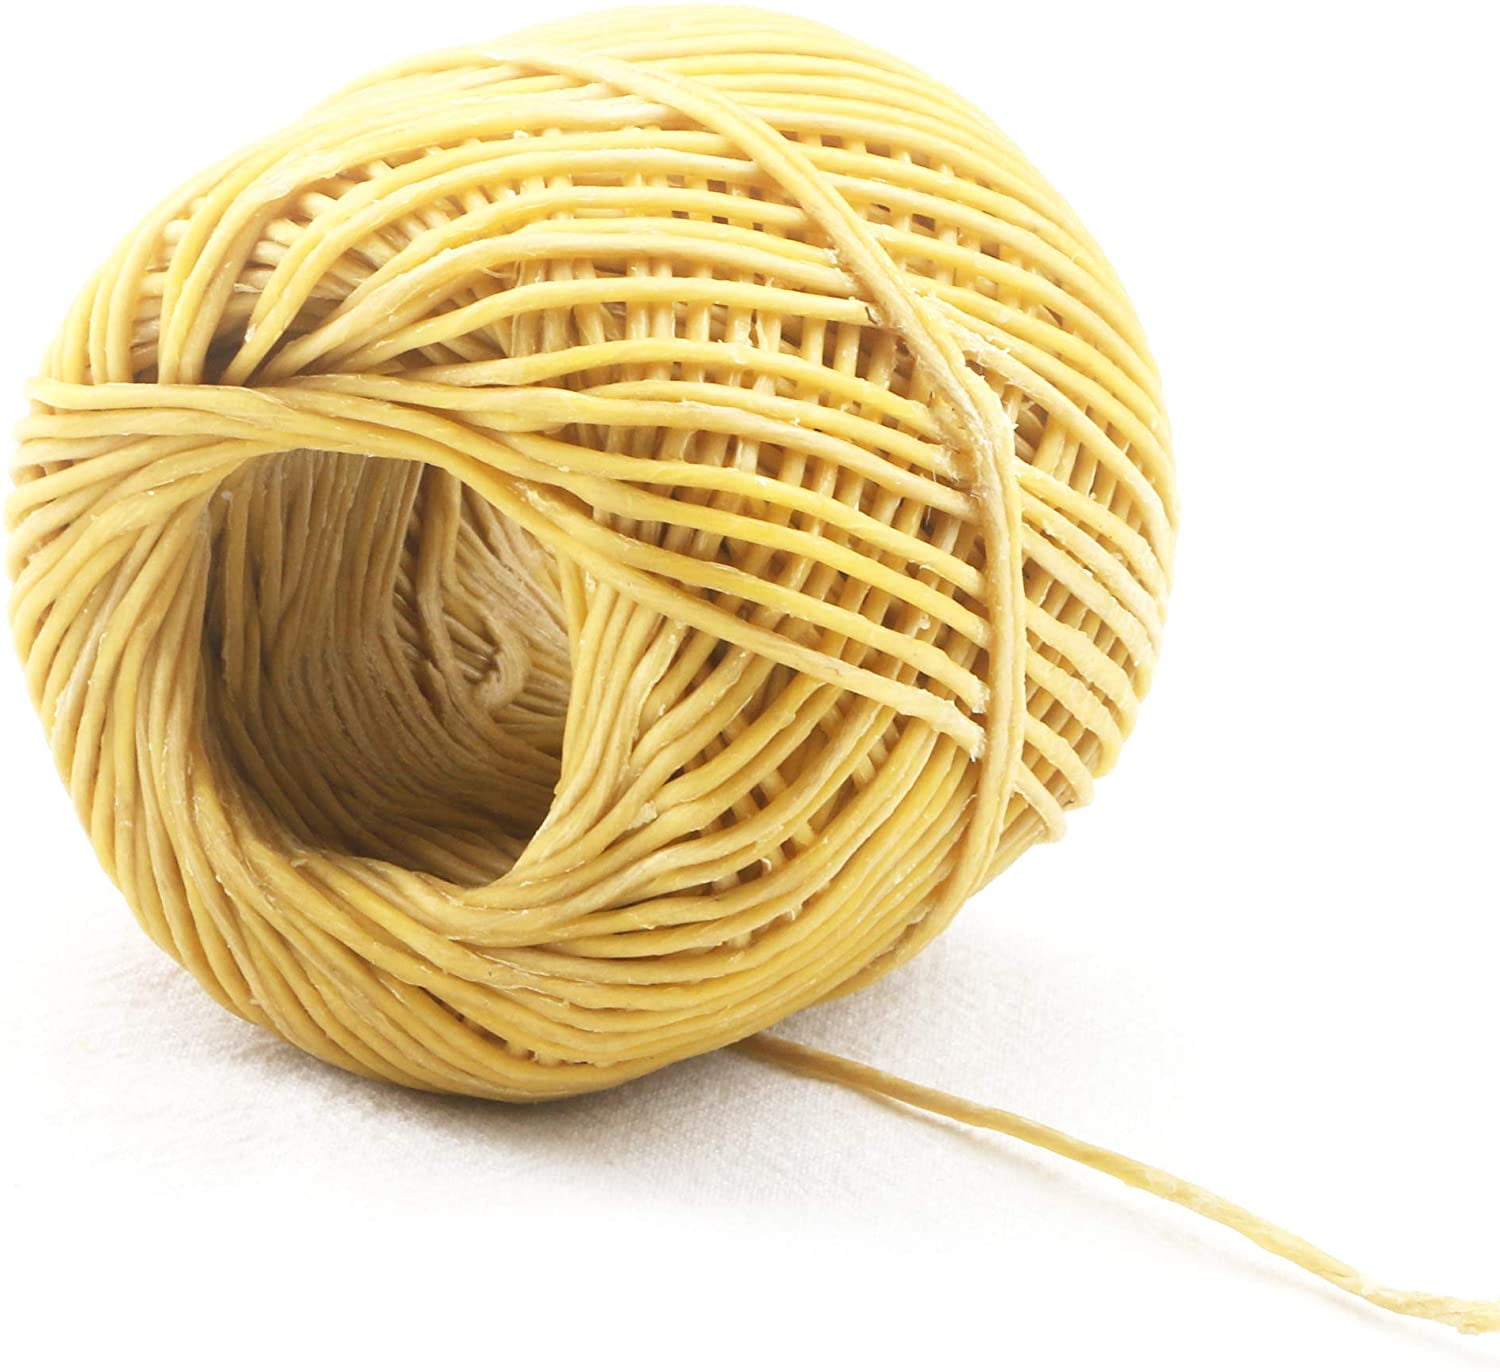 MILIVIXAY Thick Hemp Wick with Natural Beeswax Coating, Edible Grade  Beeswax, 200 FT Spool, Thick Size (2.0mm),Unbleached, Un-dyed and 100%  Organic